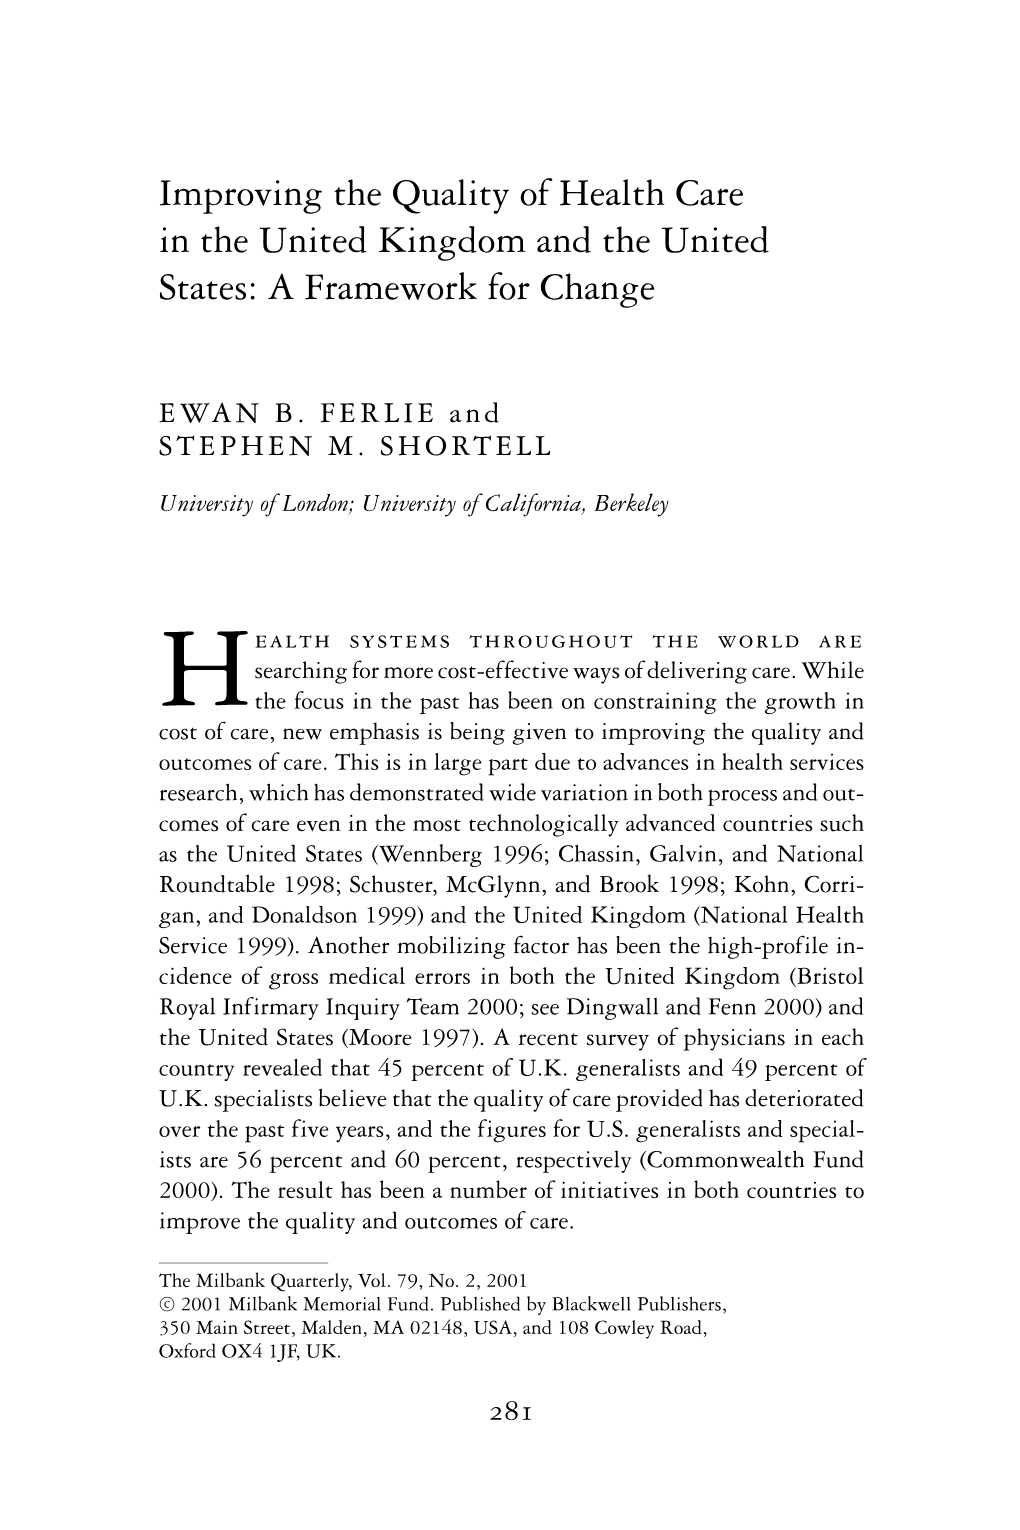 Improving the Quality of Health Care in the United Kingdom and the United States: a Framework for Change